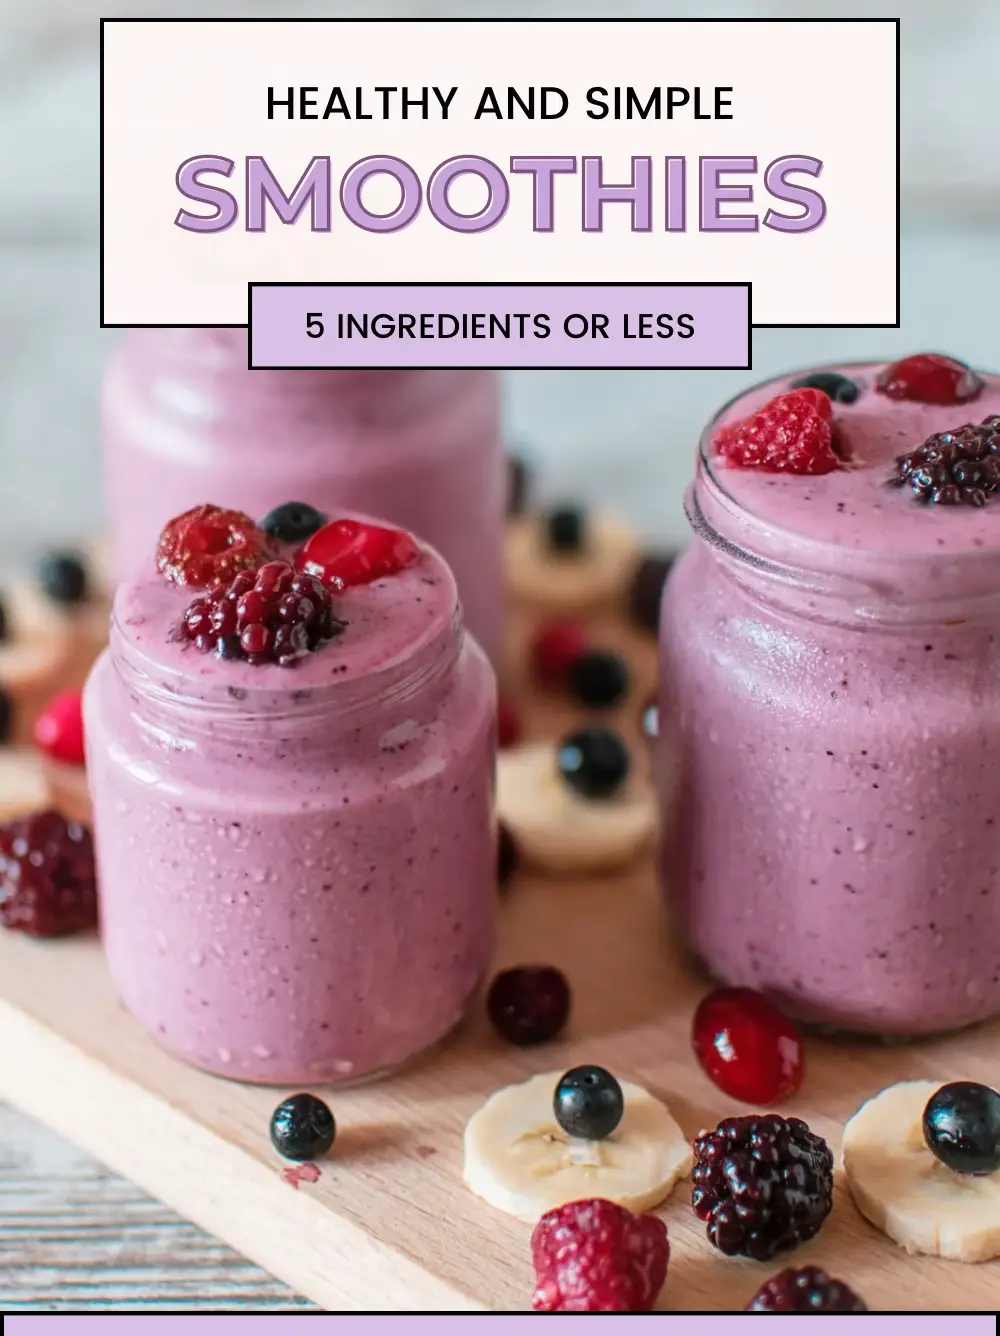 5 easy smoothie recipes 🍋🫶, Gallery posted by Alexis Welchman